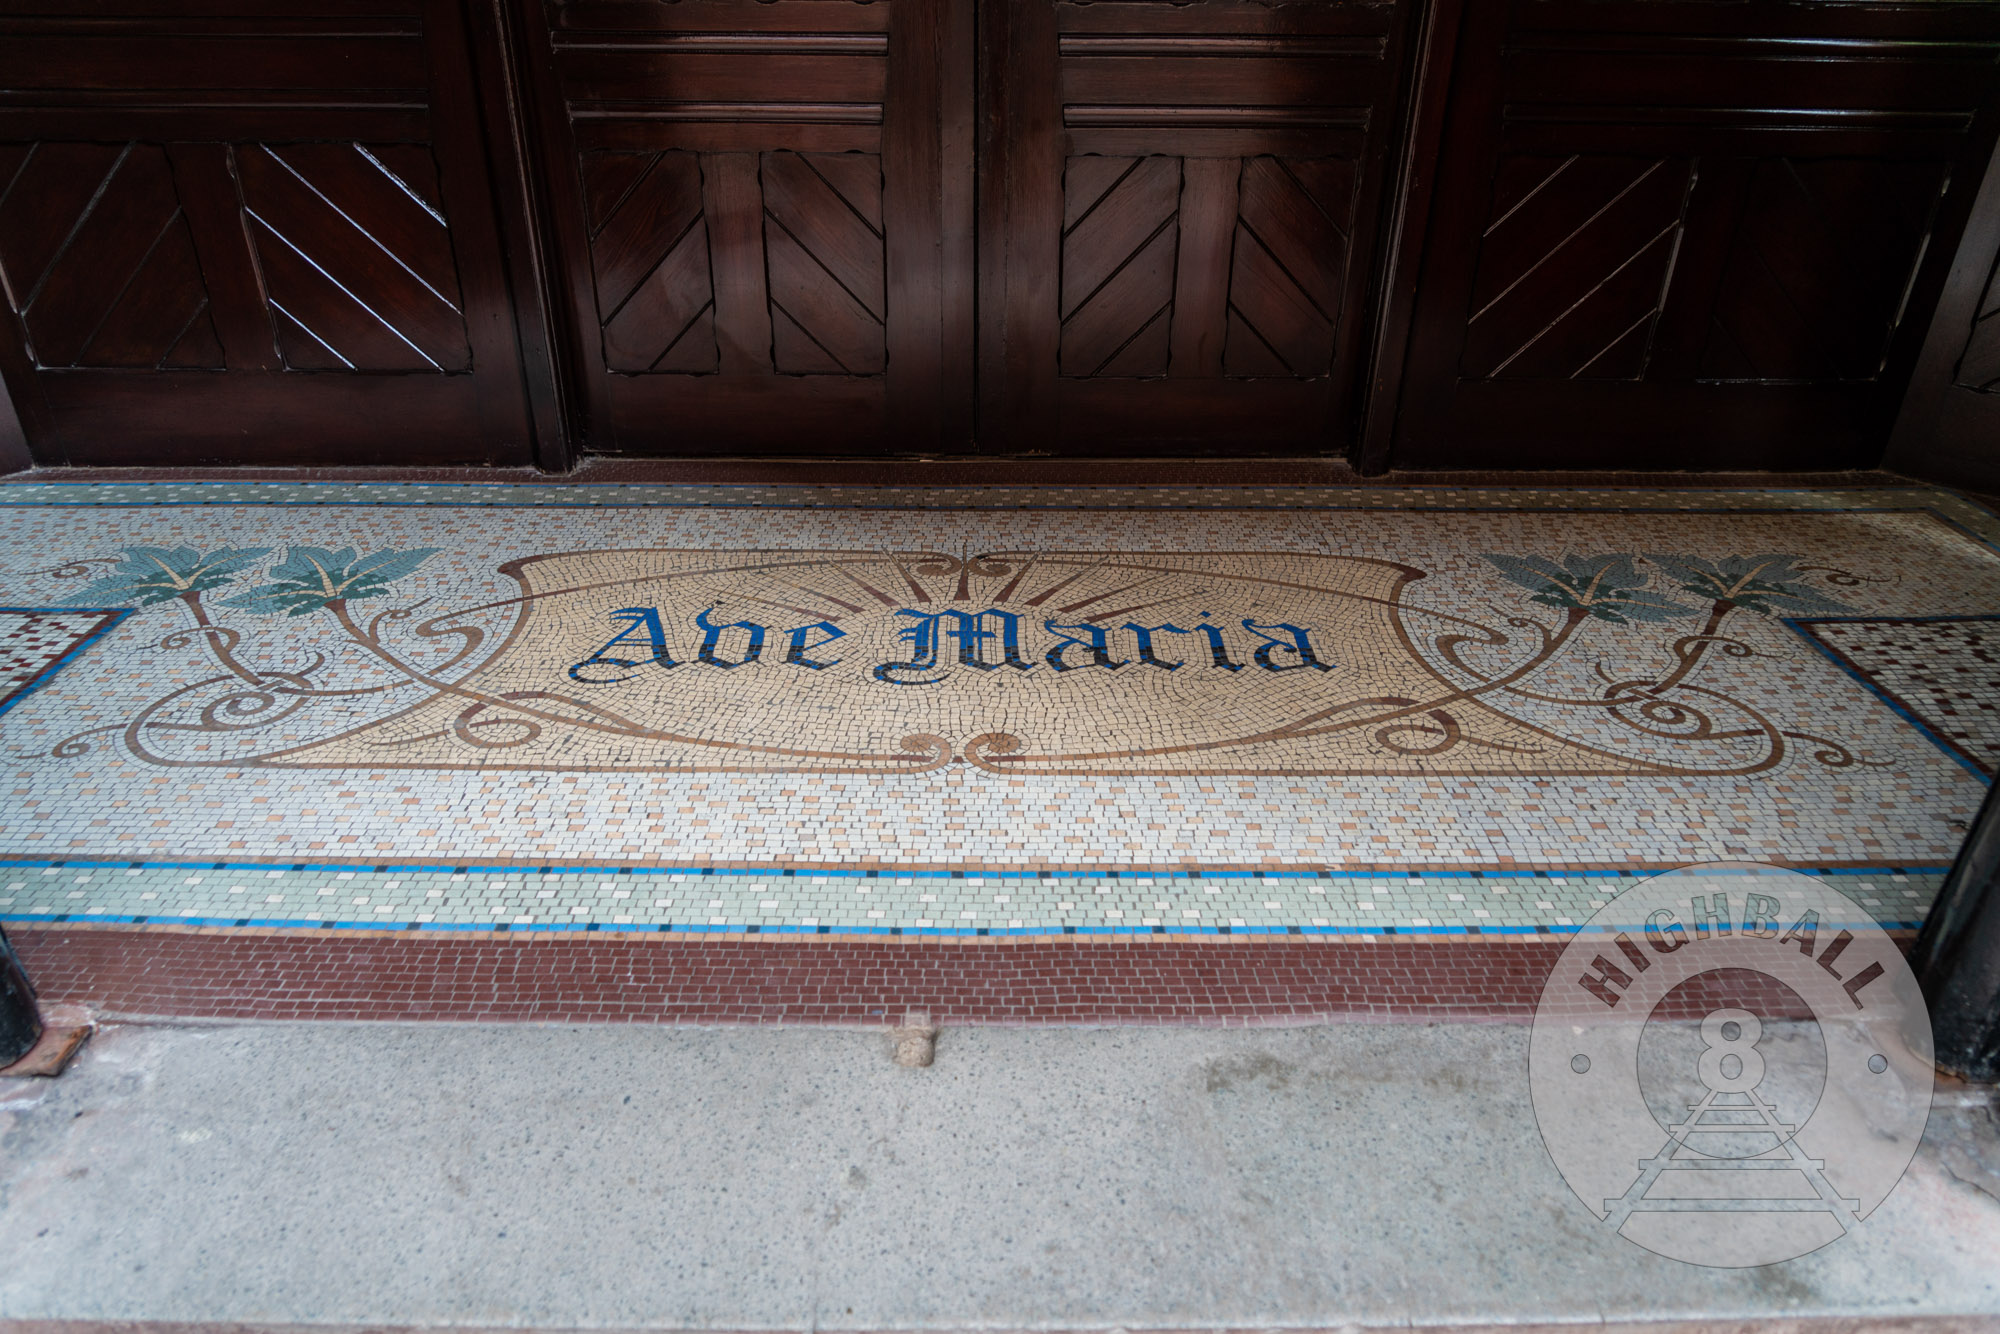 Tilework reading "Ave Maria," at St. Mary's Church, known as the Hidden Gem, Mulberry Street, Manchester, England, UK, 2018.